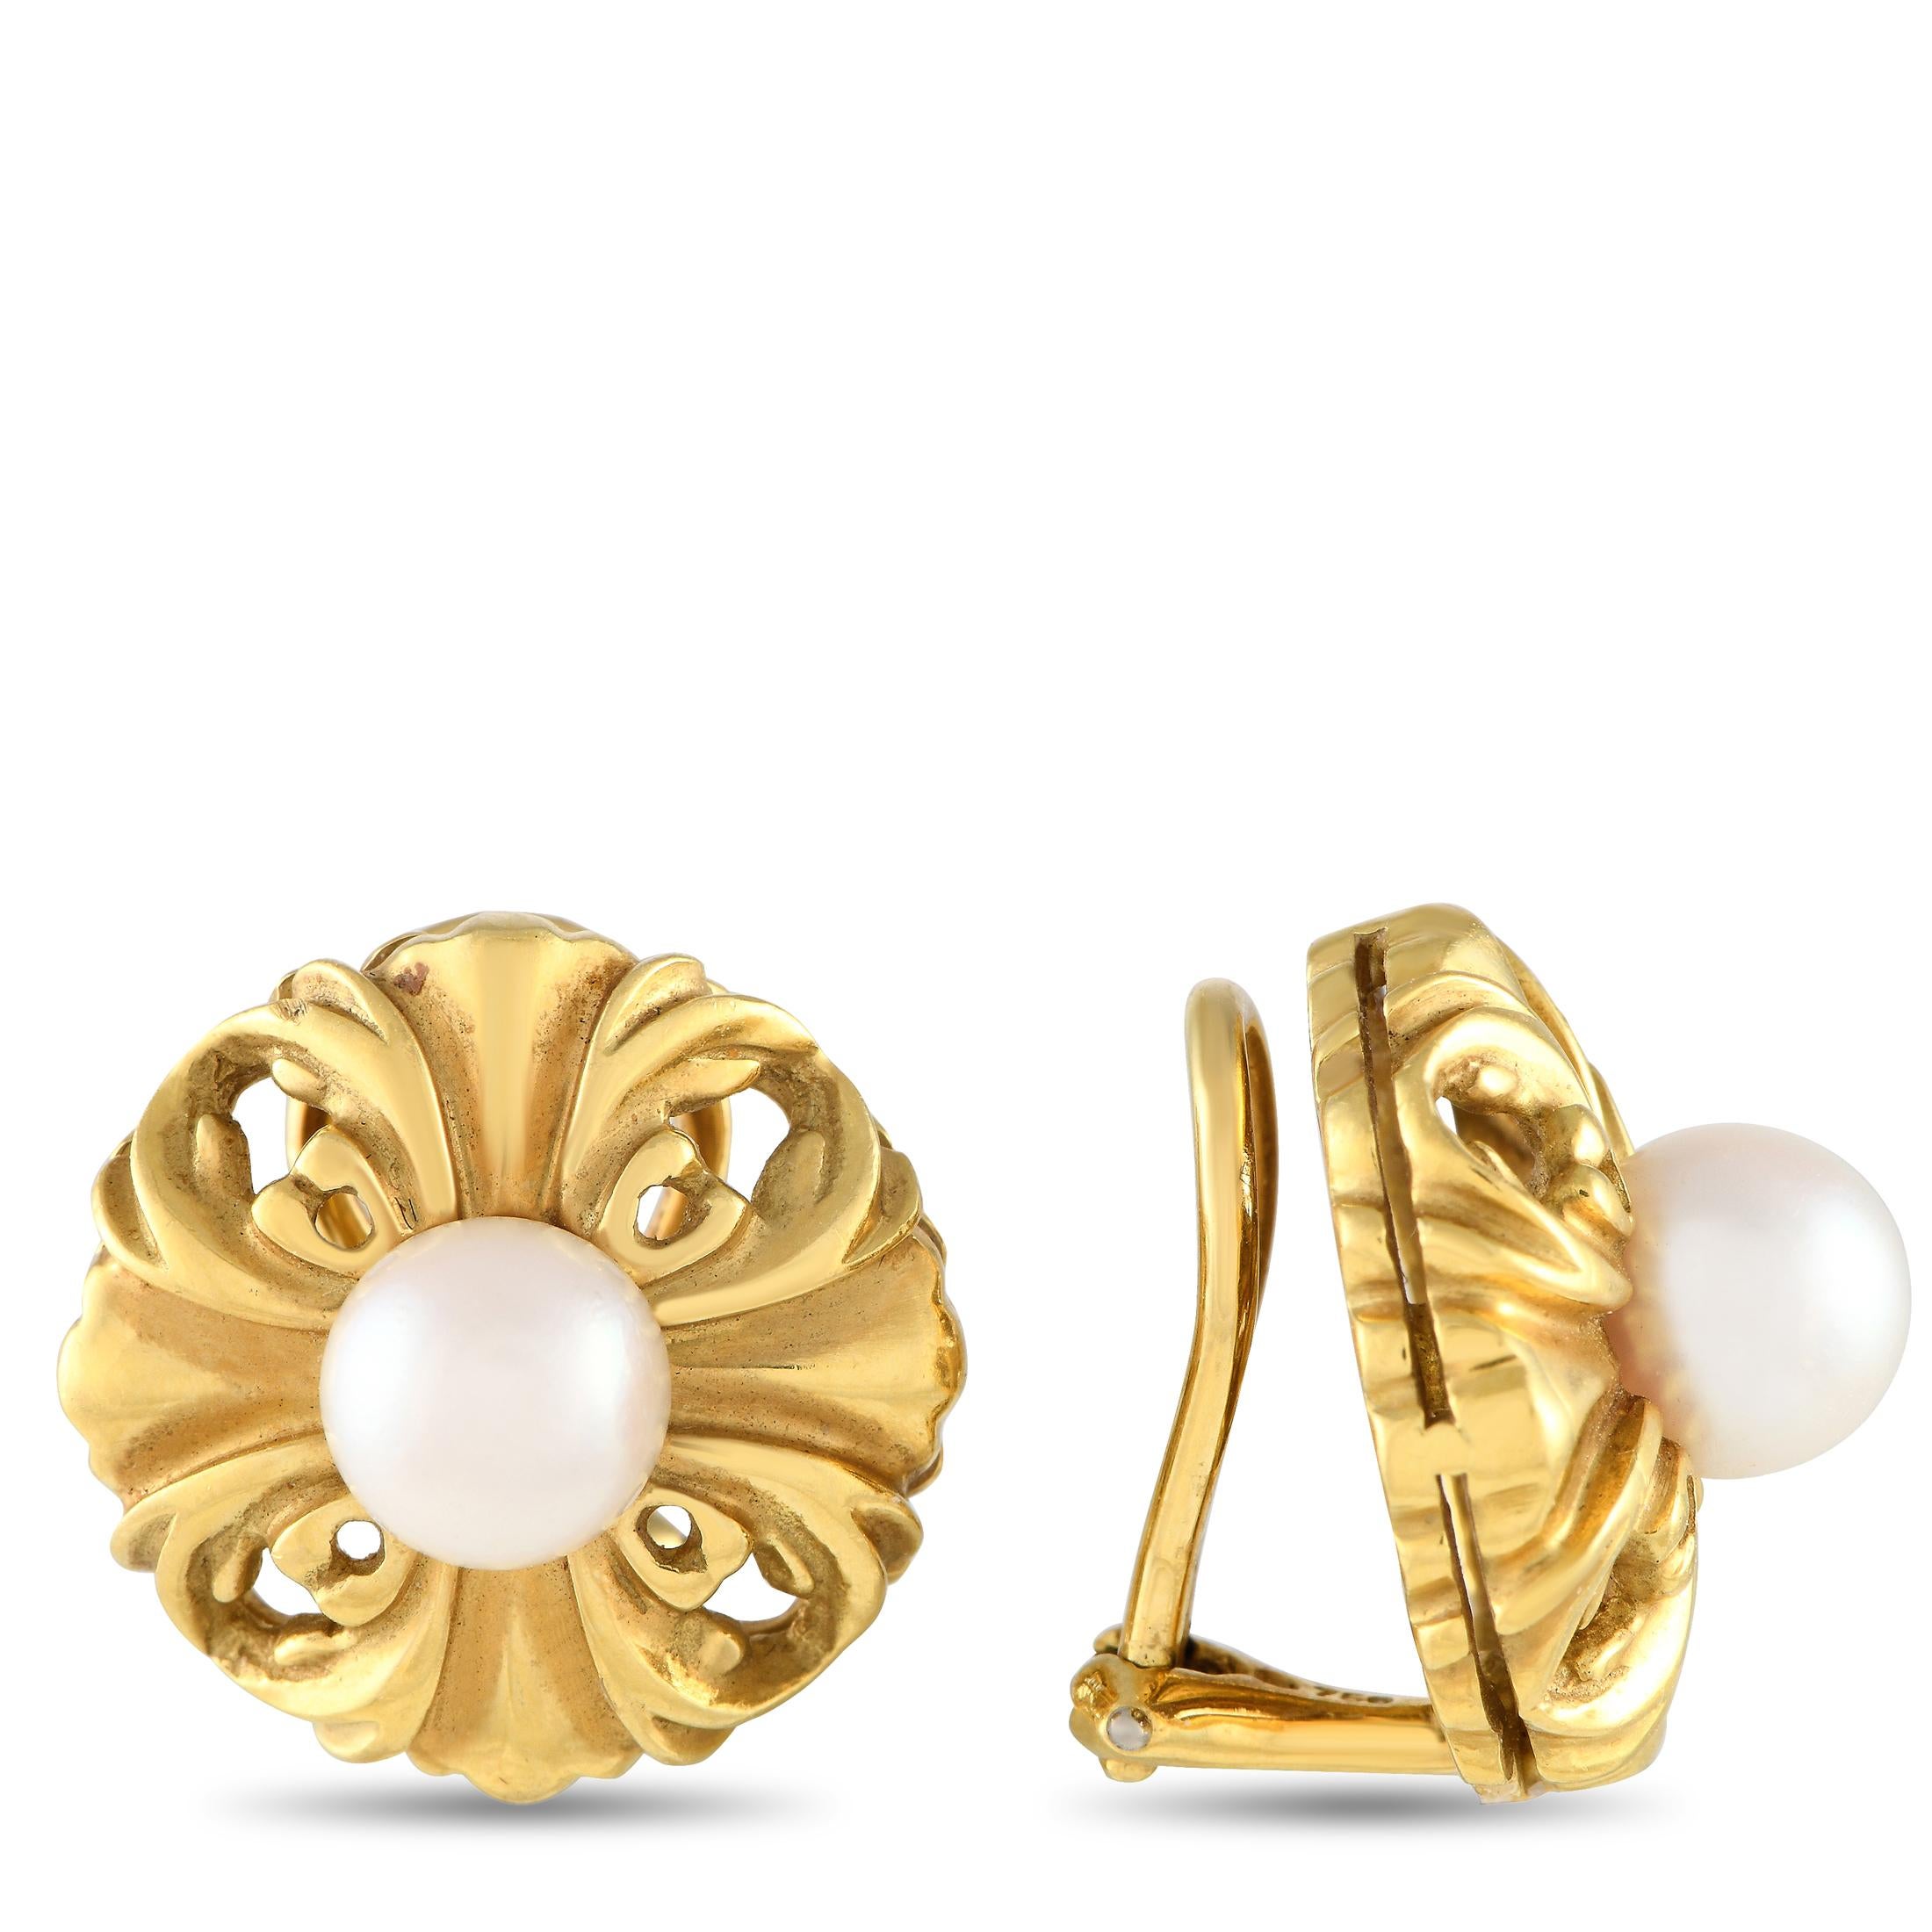 These vintage clip-on earrings can effortlessly charm their way through your wardrobe. Each earring features gracefully carved swirls and flourishes, inspired by the fleur-de-lys motif. At the center of each earring is a lustrous white pearl, giving